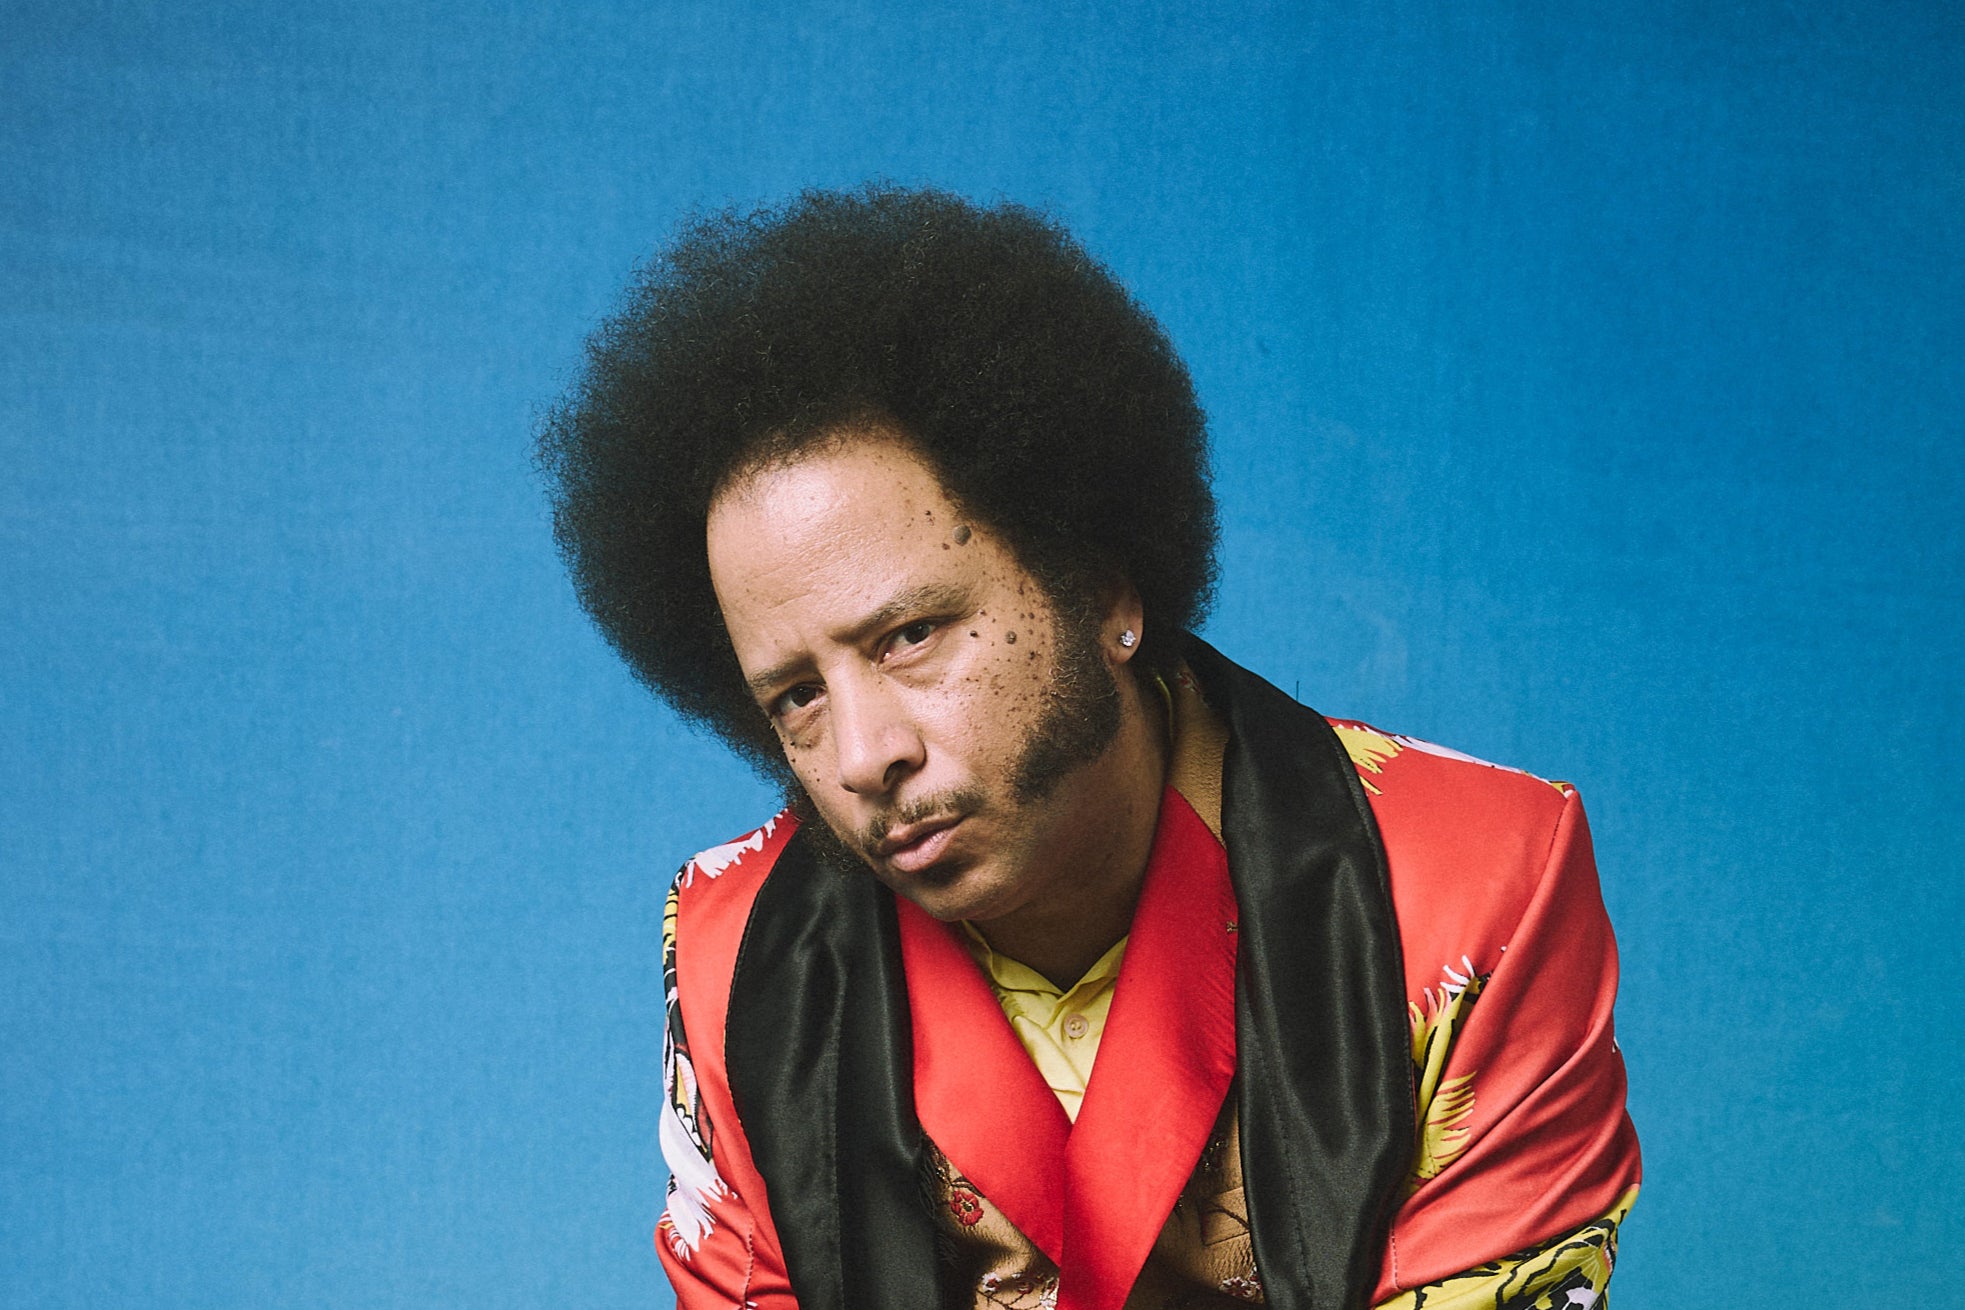 Boots Riley praised Glazer for ‘speaking out against the atrocities in Gaza’